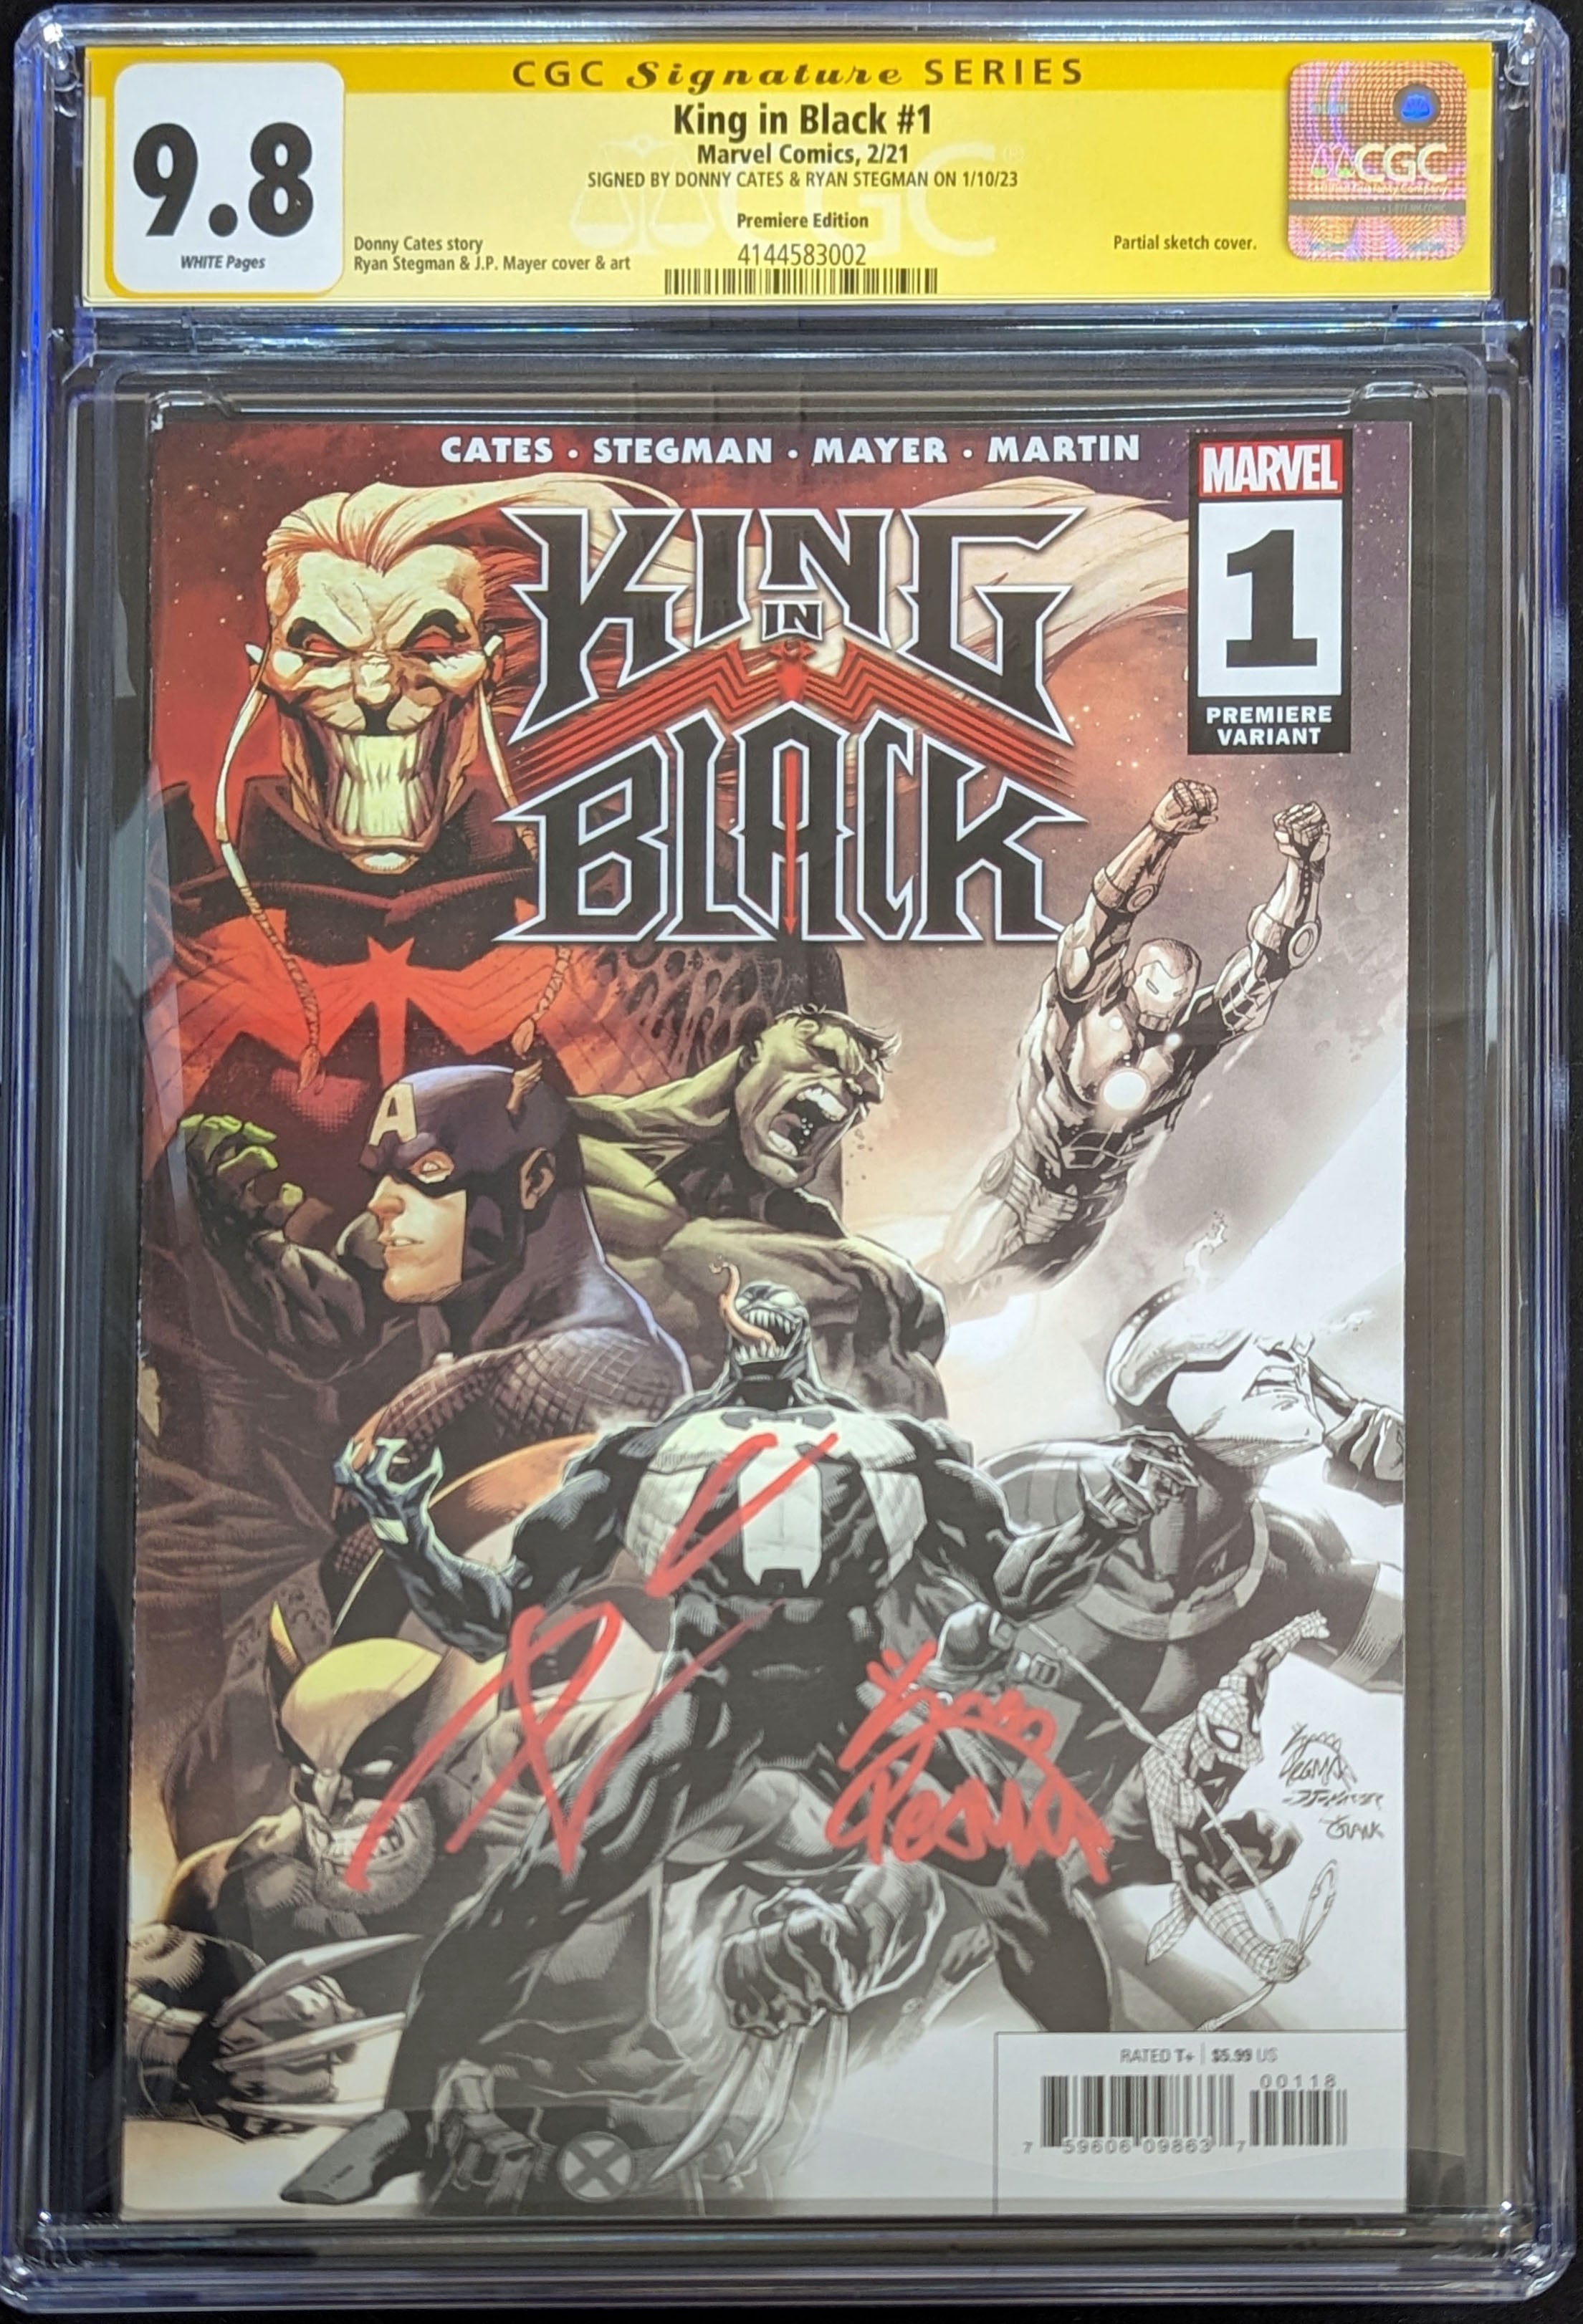 KING IN BLACK #1 (OF 5) CATES & STEGMAN PREMIERE VAR Signed Graded CGC 9.8